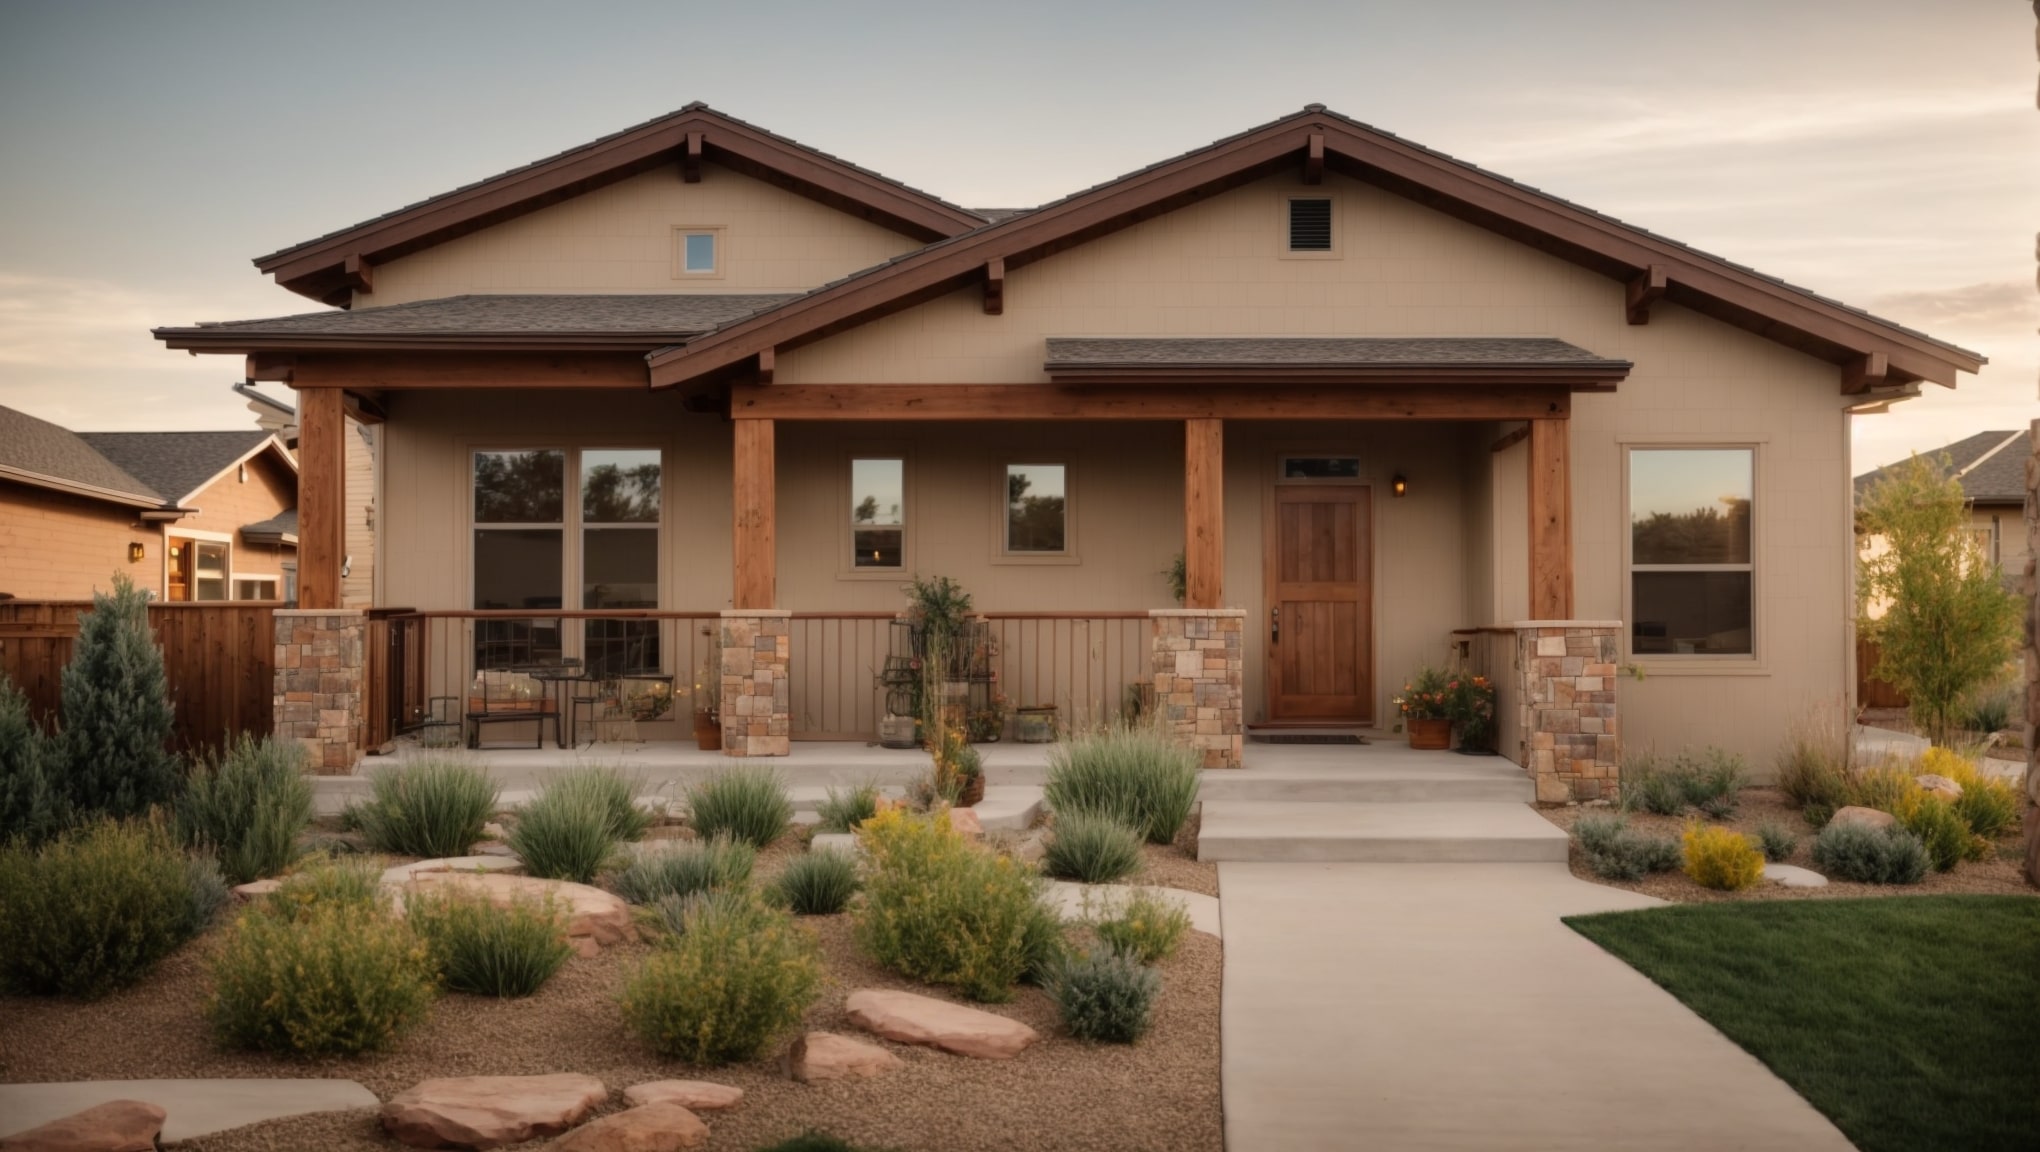 A picturesque Craftsman residence in Longmont, Colorado, with Diamond Kote.